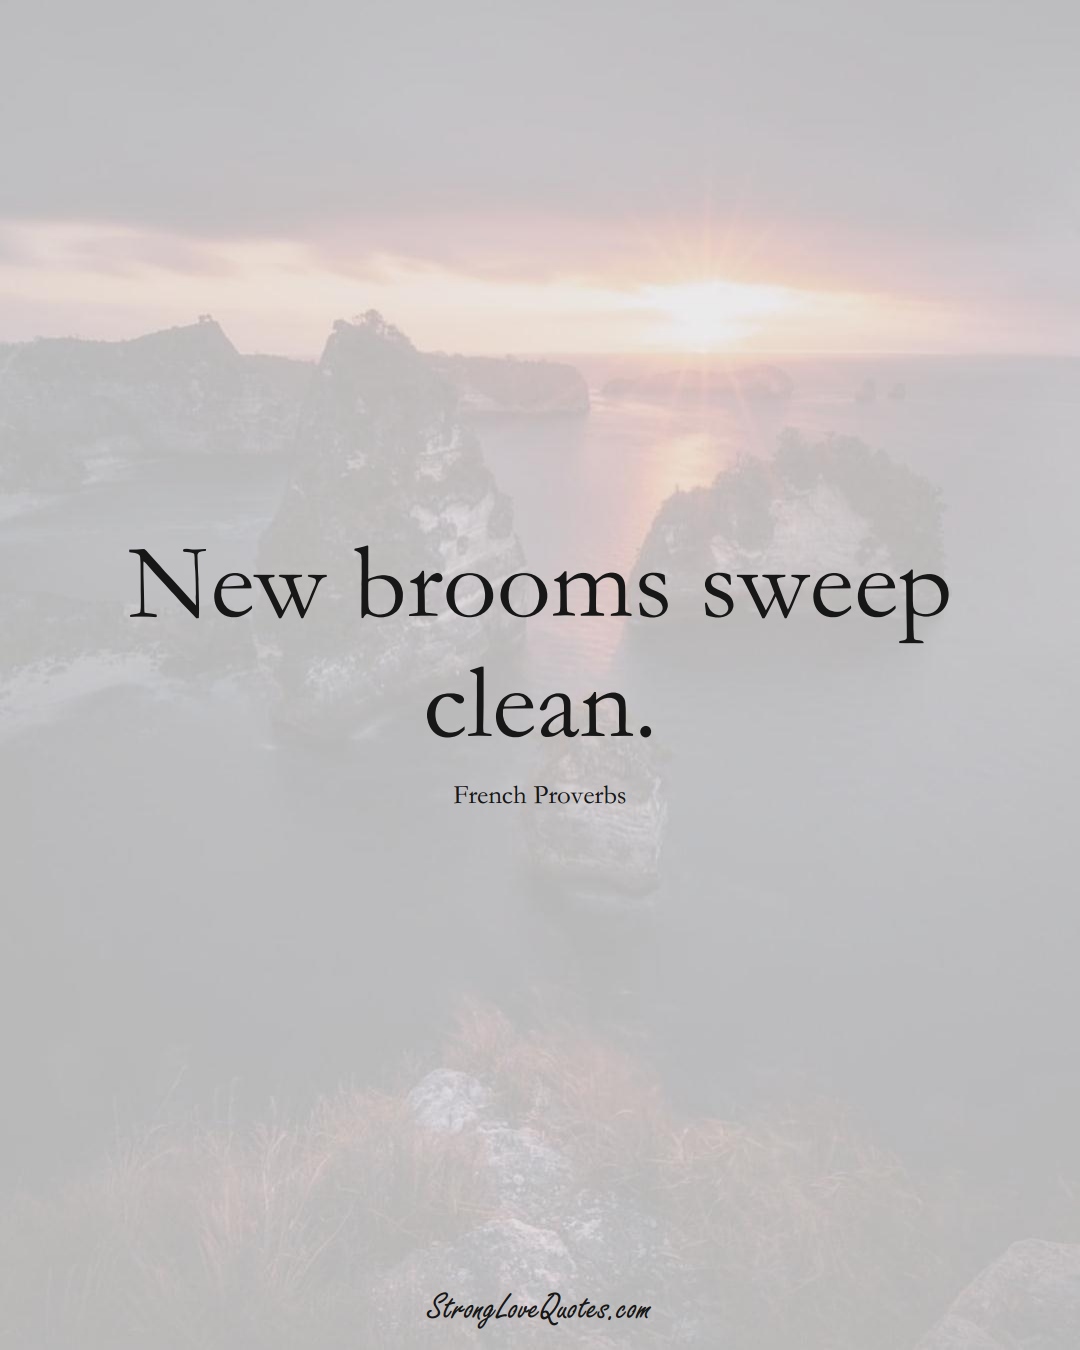 New brooms sweep clean. (French Sayings);  #EuropeanSayings